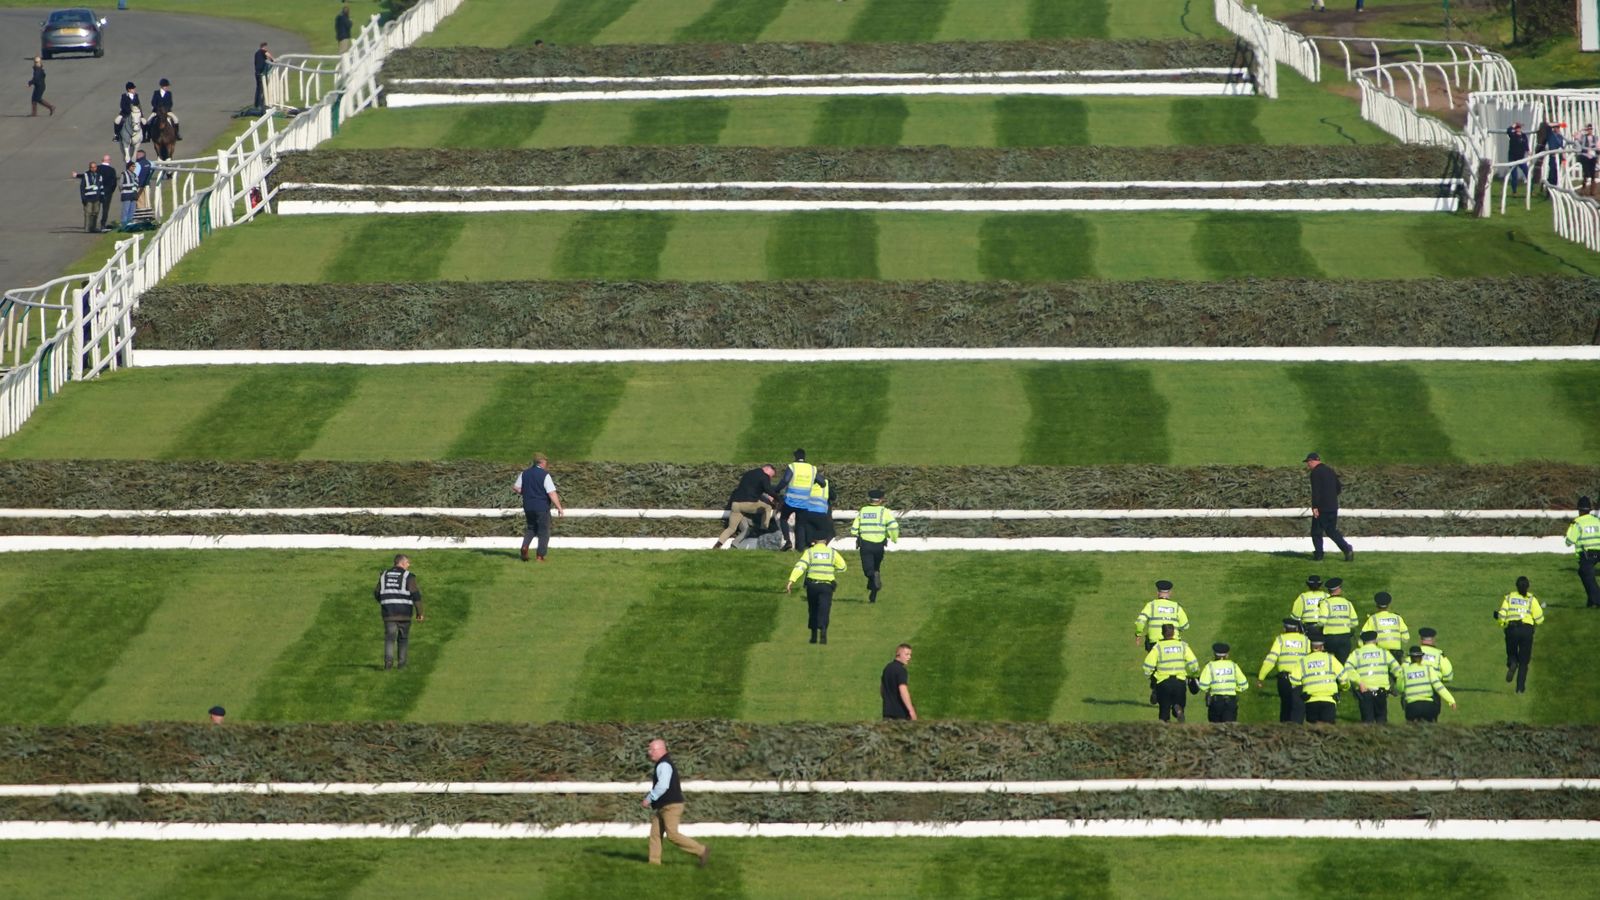 Grand National Race under way following delay due to protest LIVE